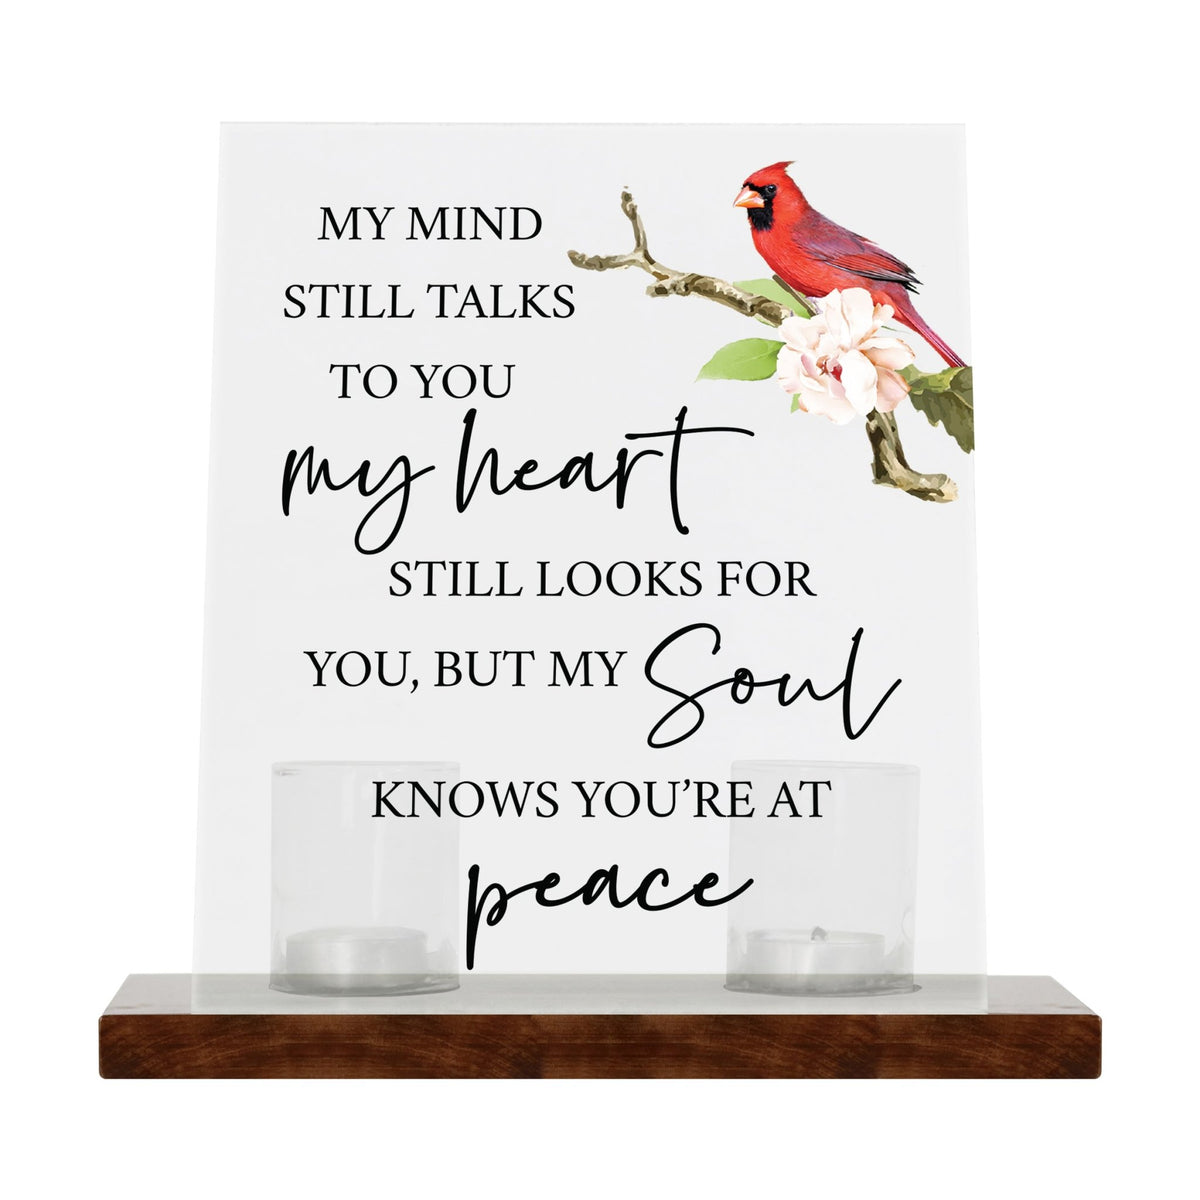 Vintage Memorial Cardinal Acrylic Sign Candle Holder With Wood Base And Glass Votives For Home Décor | My Mind Still Talks - LifeSong Milestones